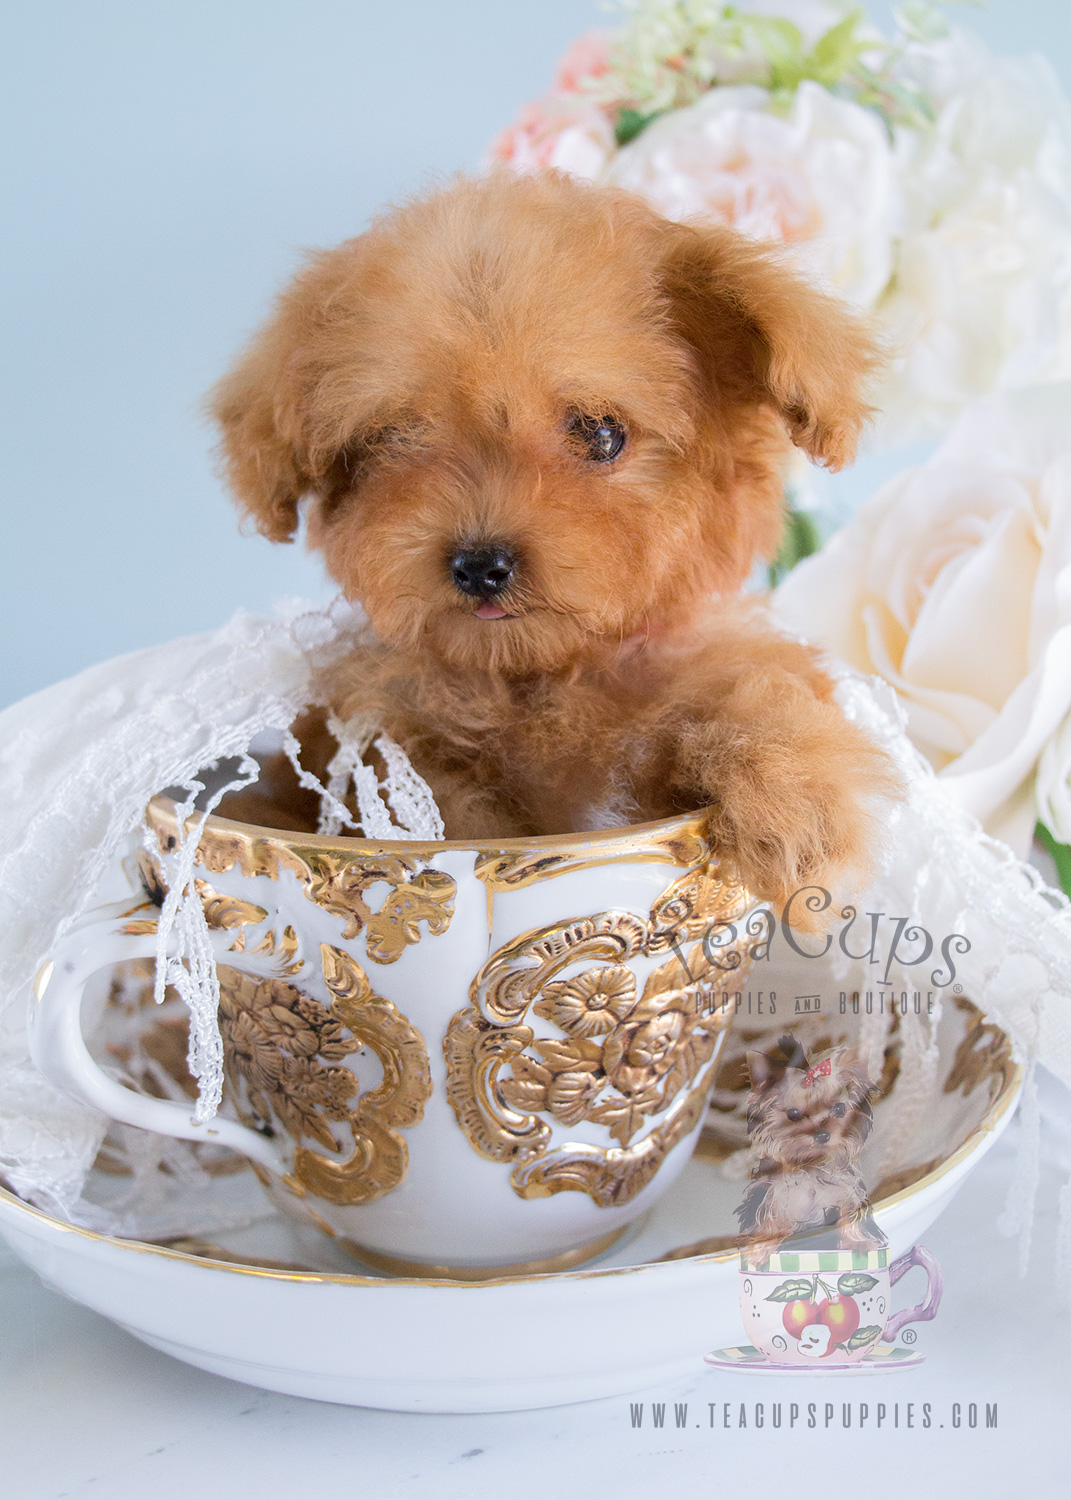 Red Toy Poodle Puppies In South Florida Teacups Puppies And Boutique